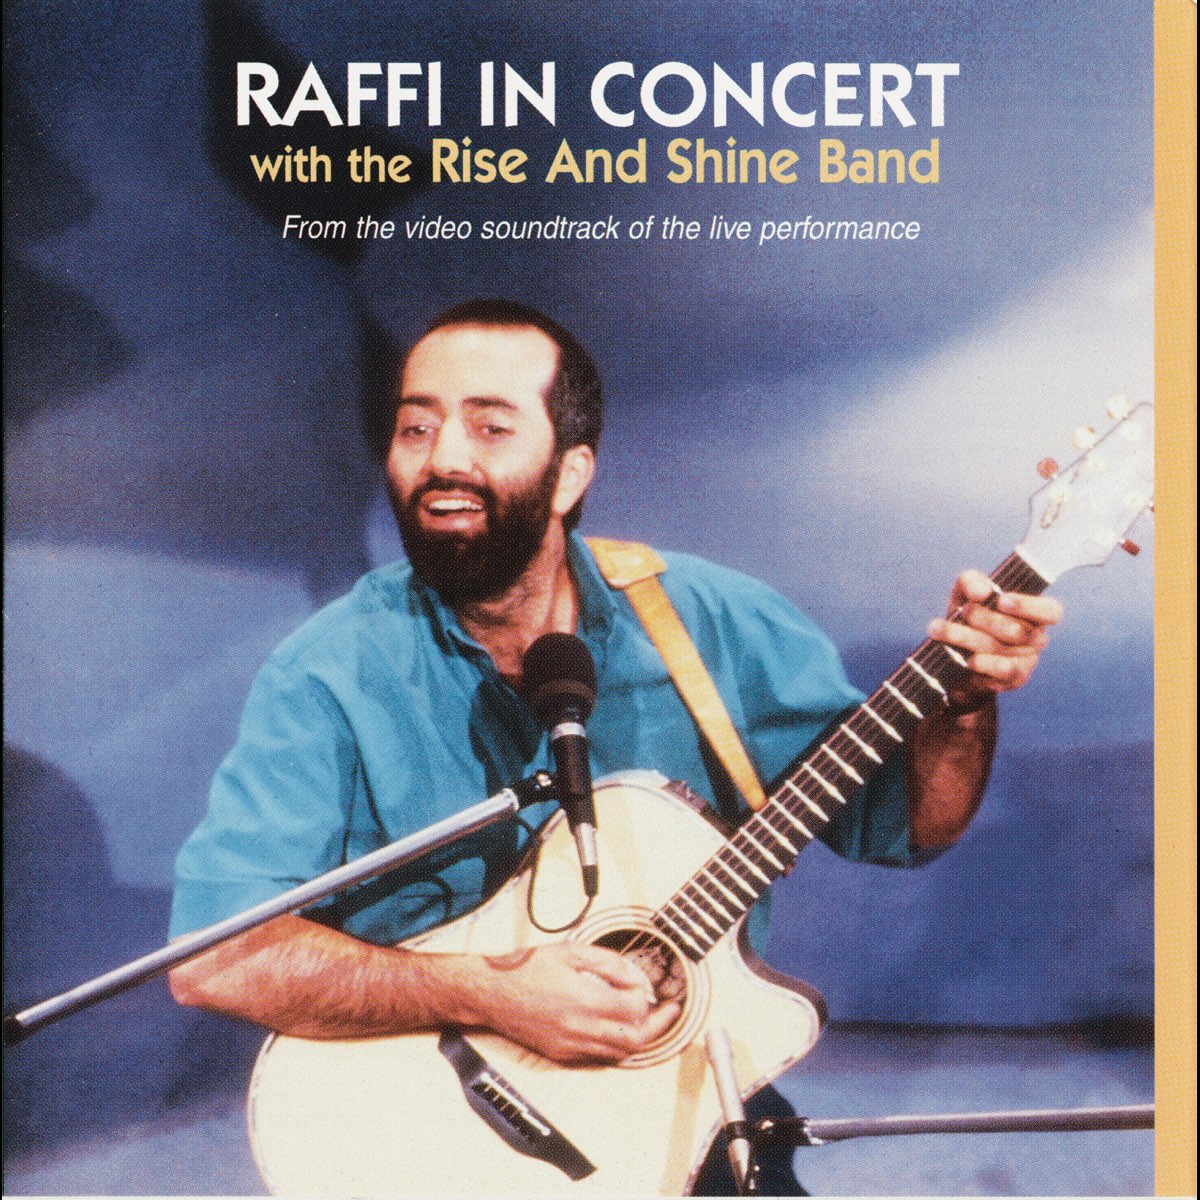 ‎Raffi In Concert (with The Rise and Shine Band) by Raffi on Apple Music